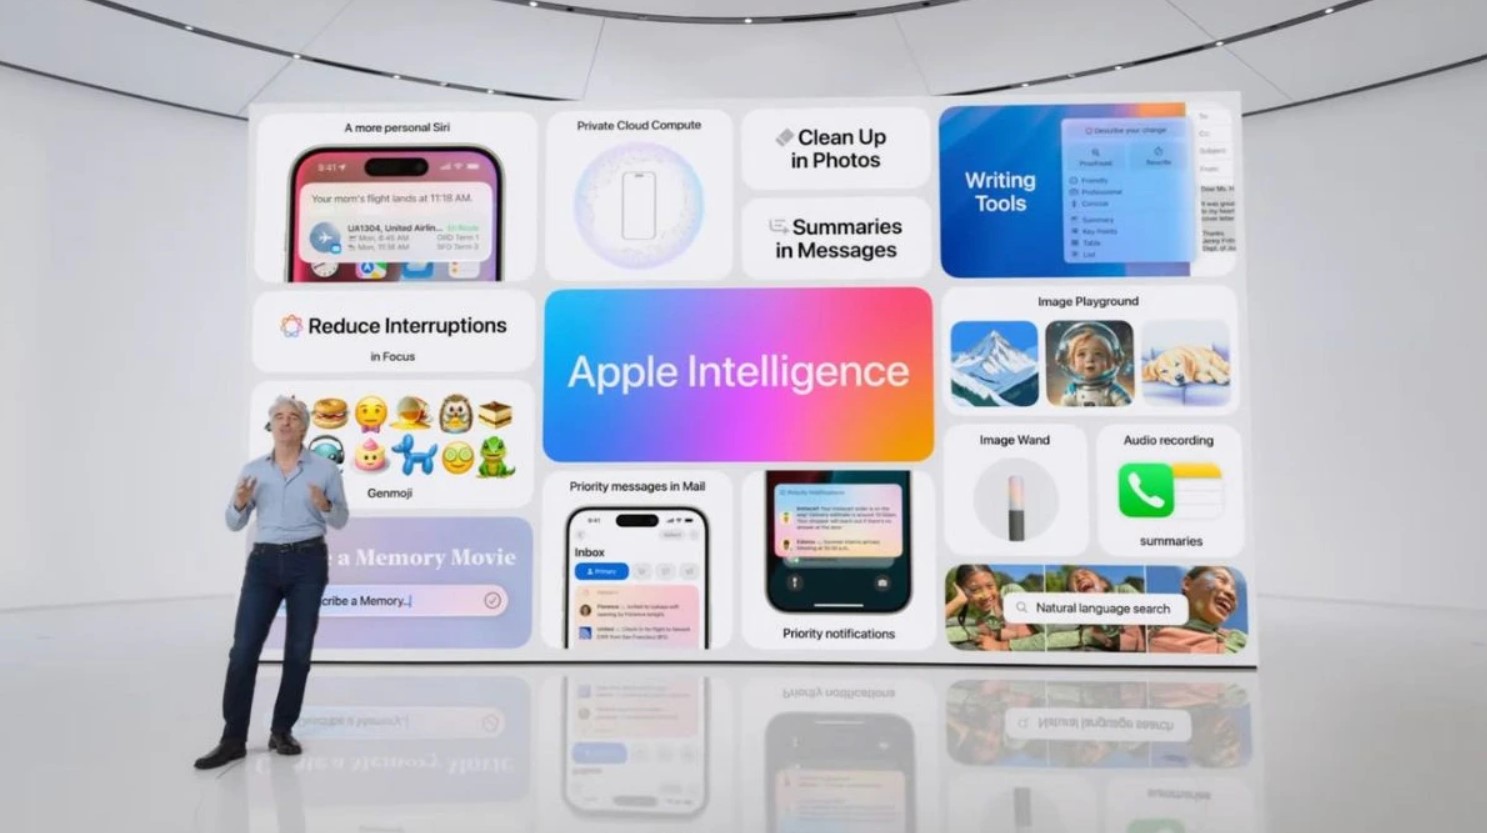 Apple Intelligence will be unavailable for EU devices at launch